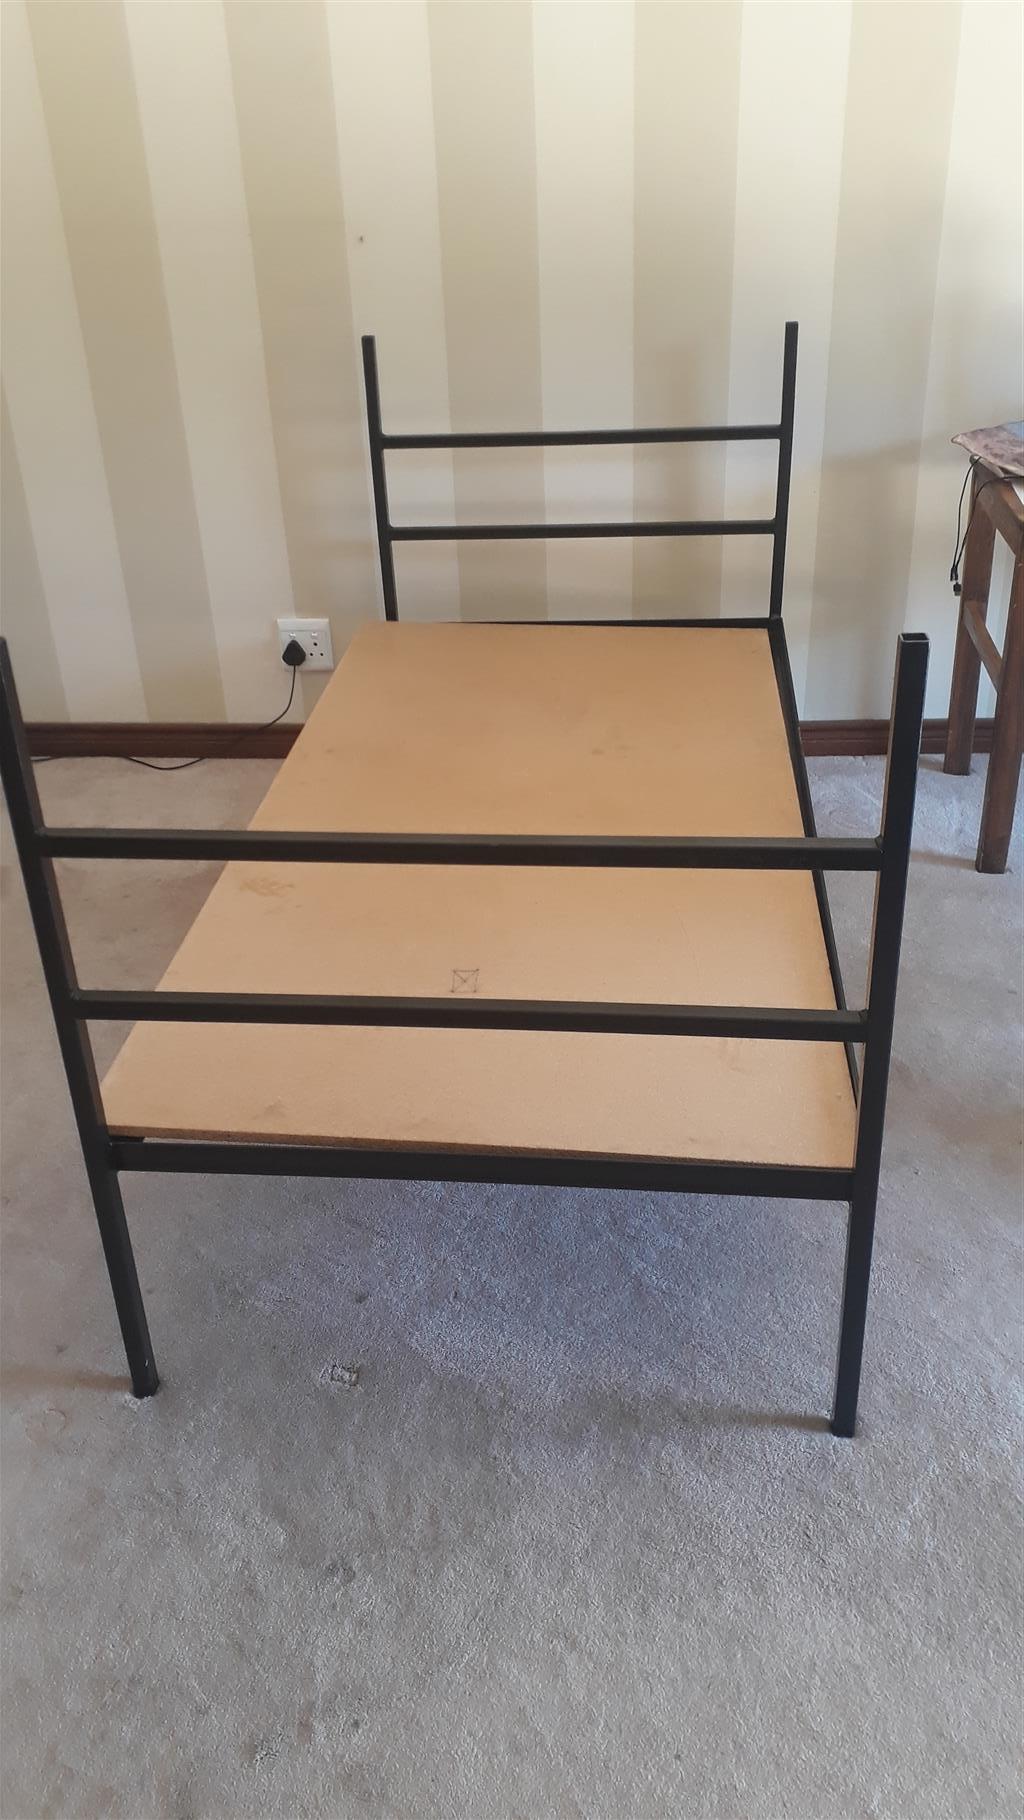 Steel newly manufactured single beds R1800 each negotiable , new buckler doors  